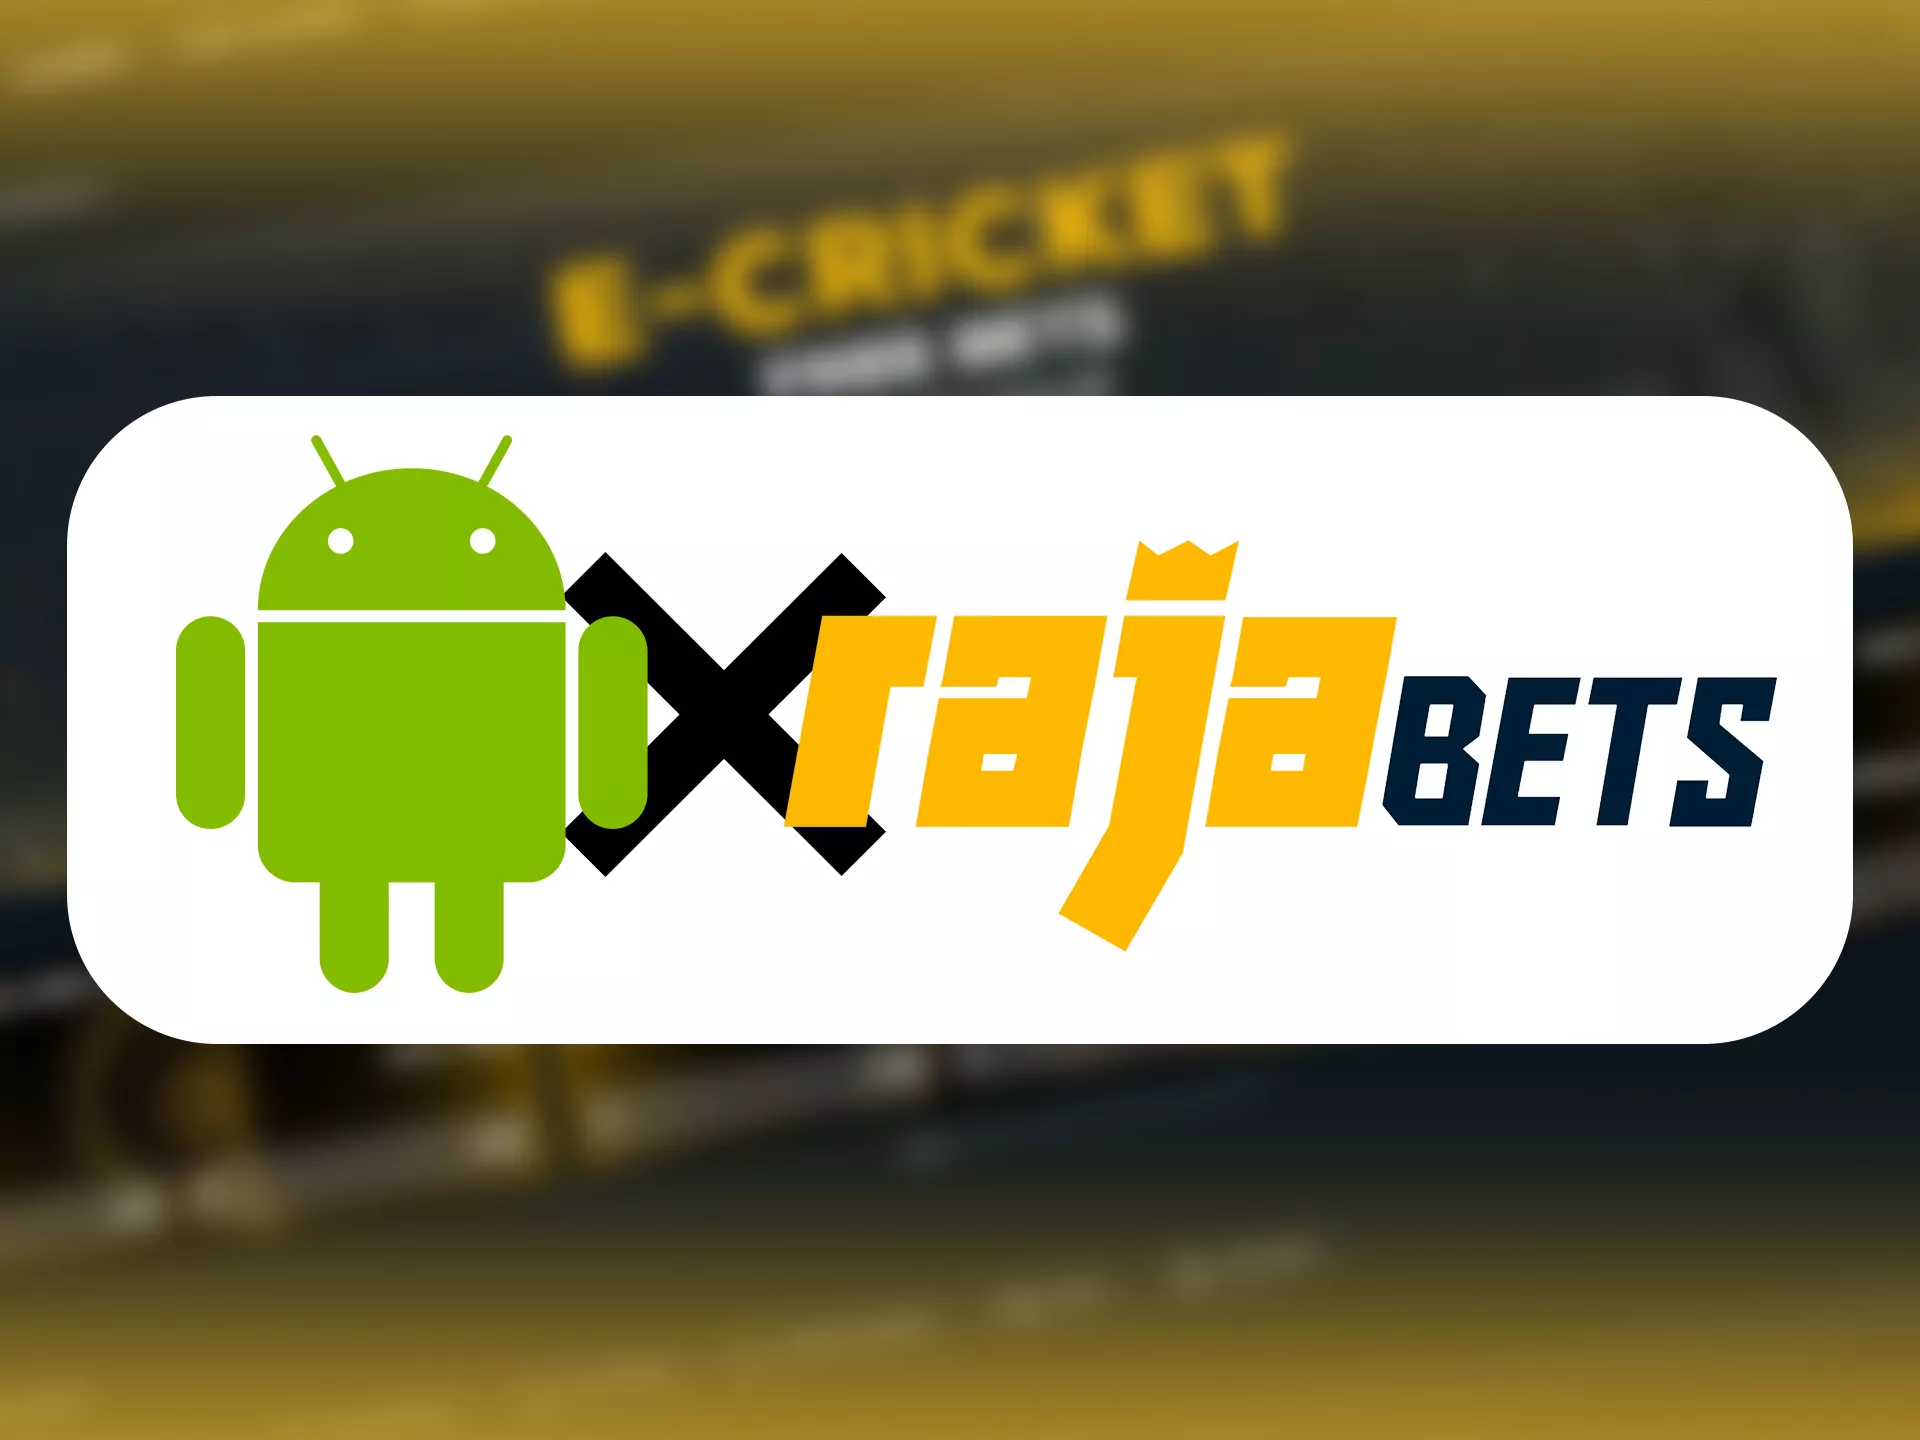 Rajabets app supports various amount of Android devices.